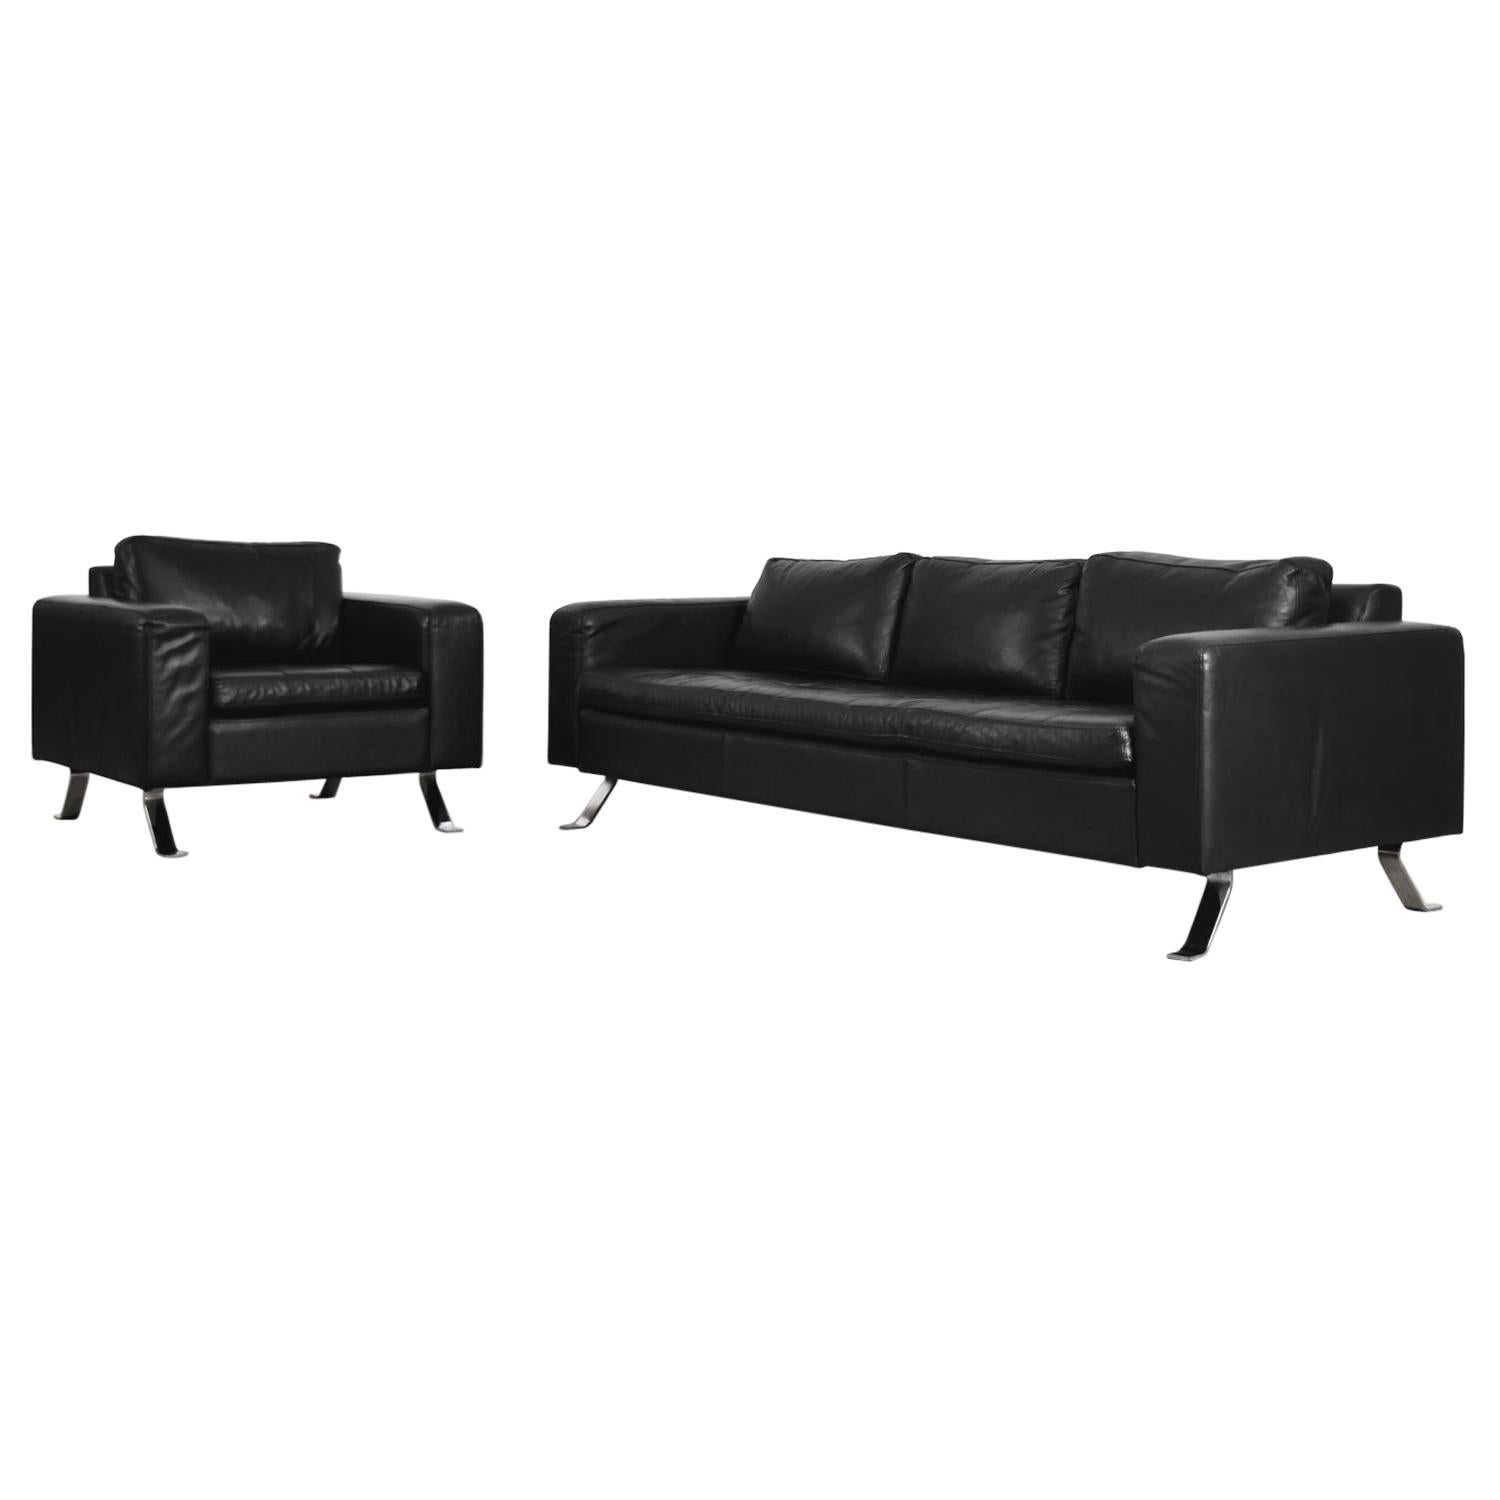 Minimalist Black Leather 3-Seat Sofa and Armchair by Lind Furniture For Sale